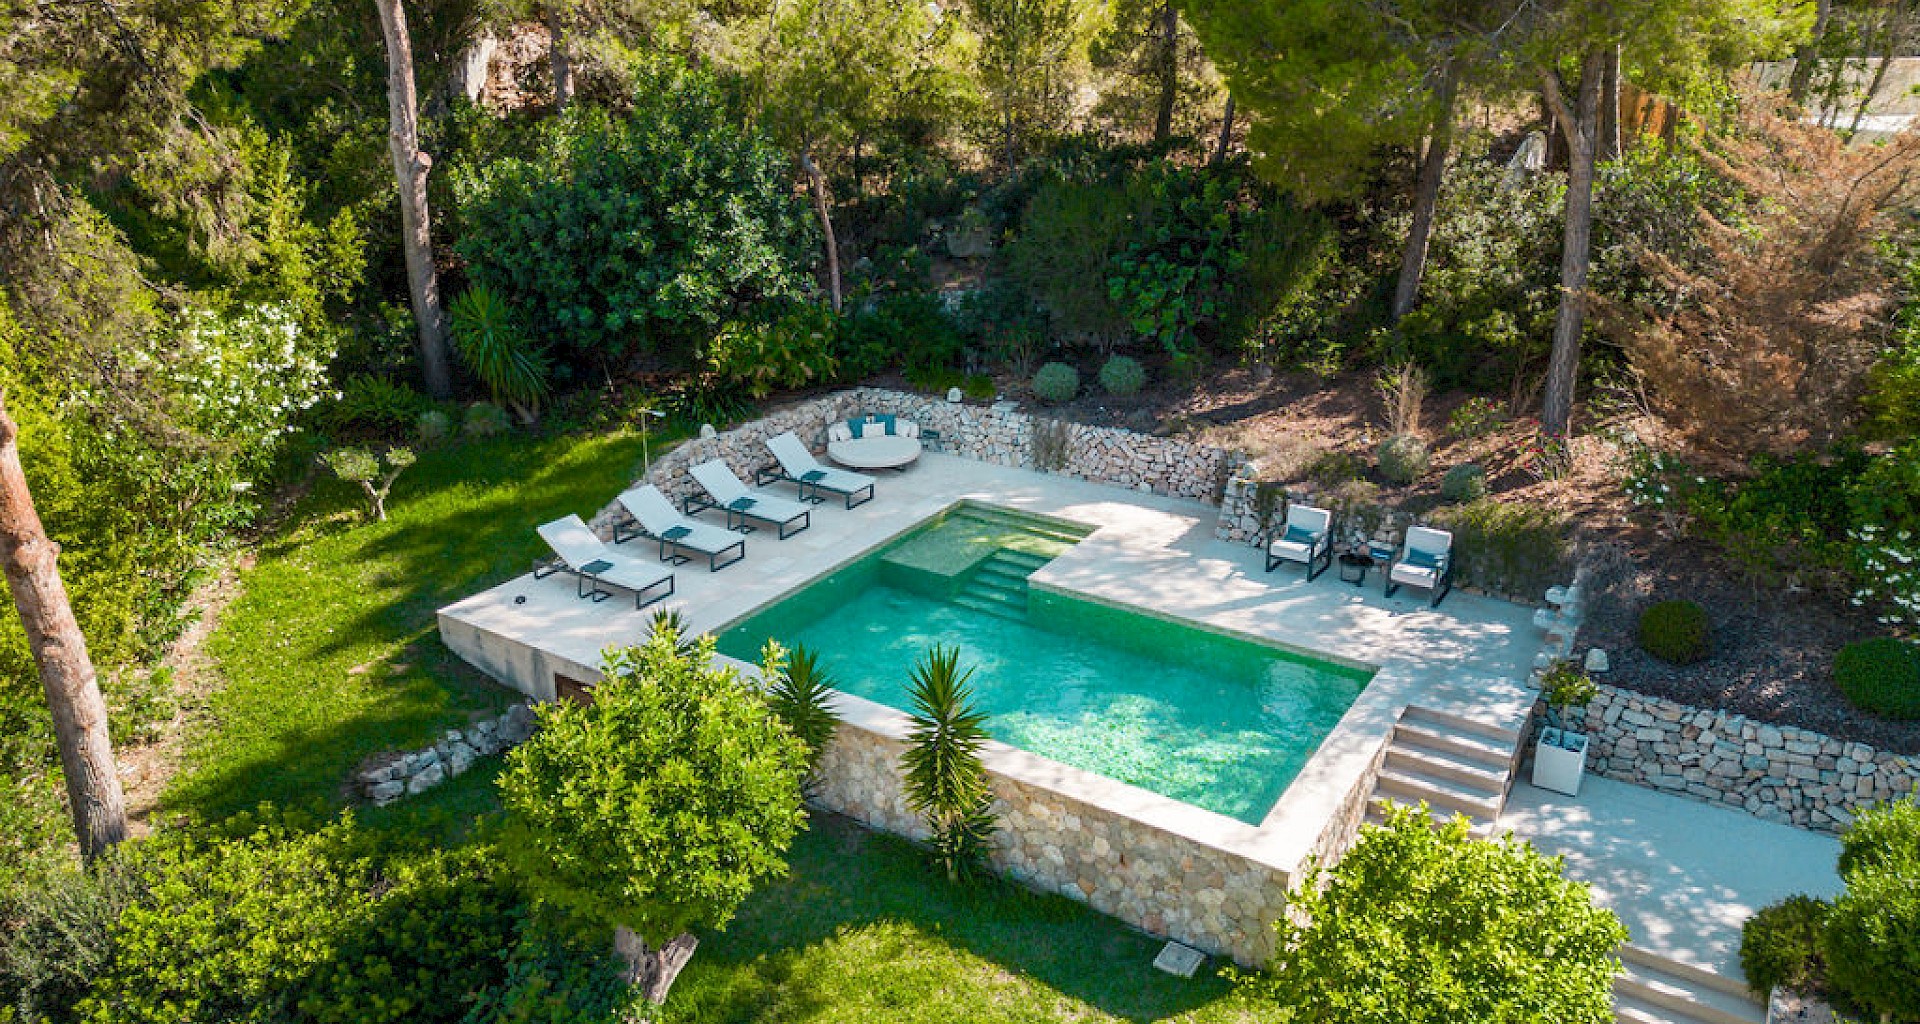 KROHN & LUEDEMANN Port Andratx villa in private location with pool in harbour location 